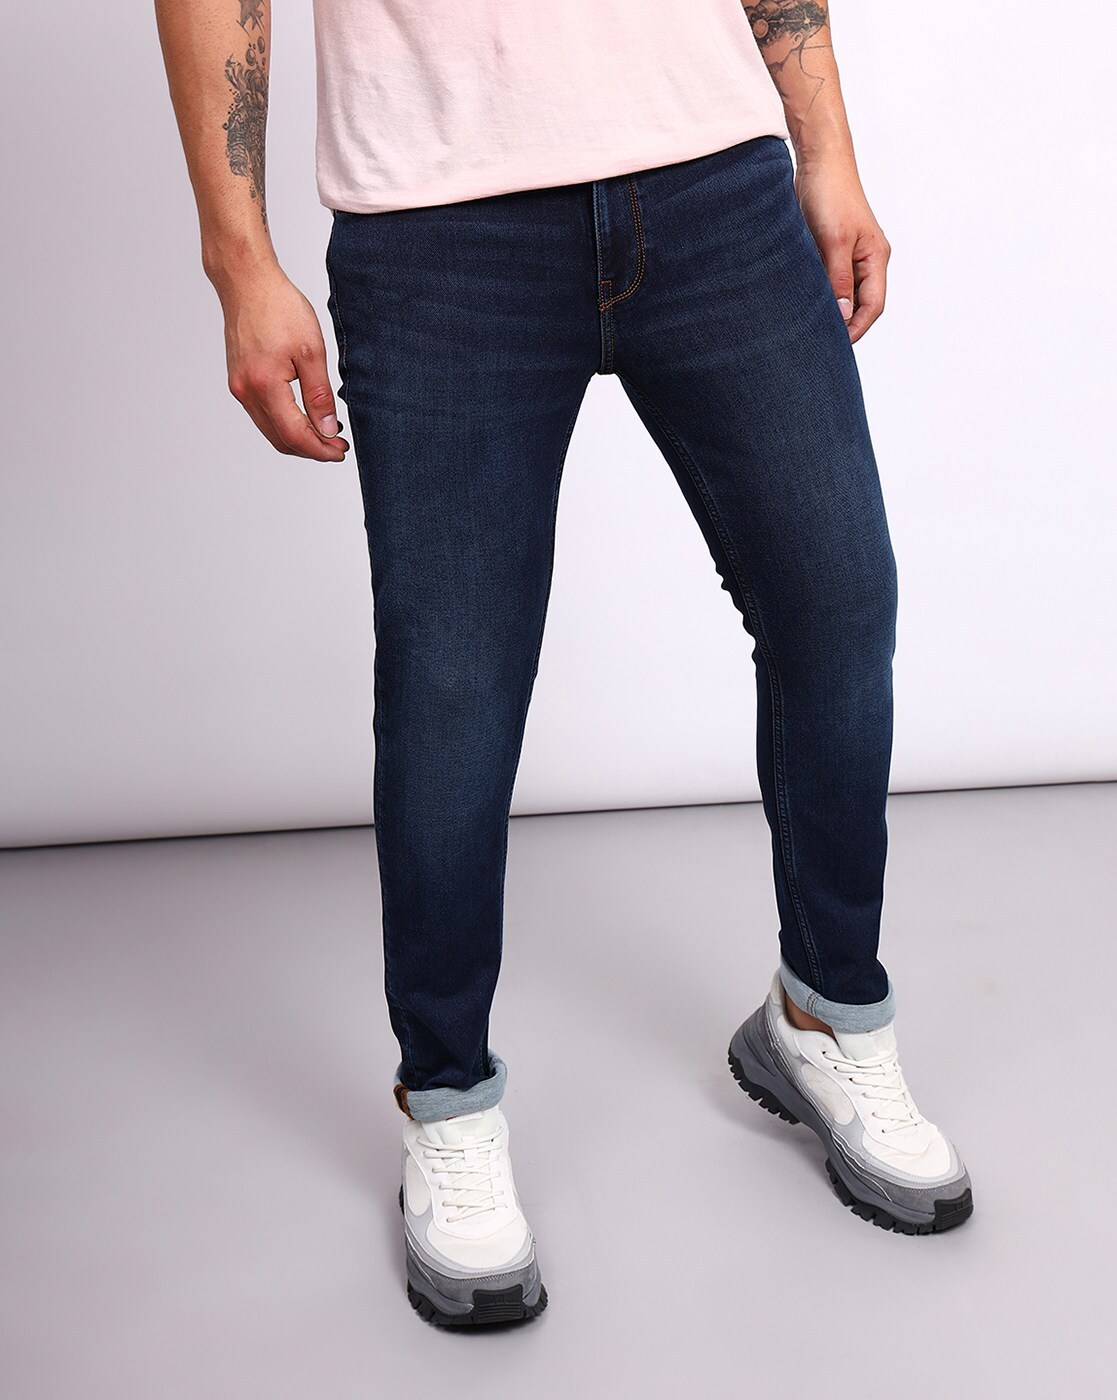 Vintage Slim Fit Skinny Jeans For Men In Light Blue With Elasticity And  Cool Hip Hop Denim Casual Joggers Pants From Fourforme, $18.55 | DHgate.Com